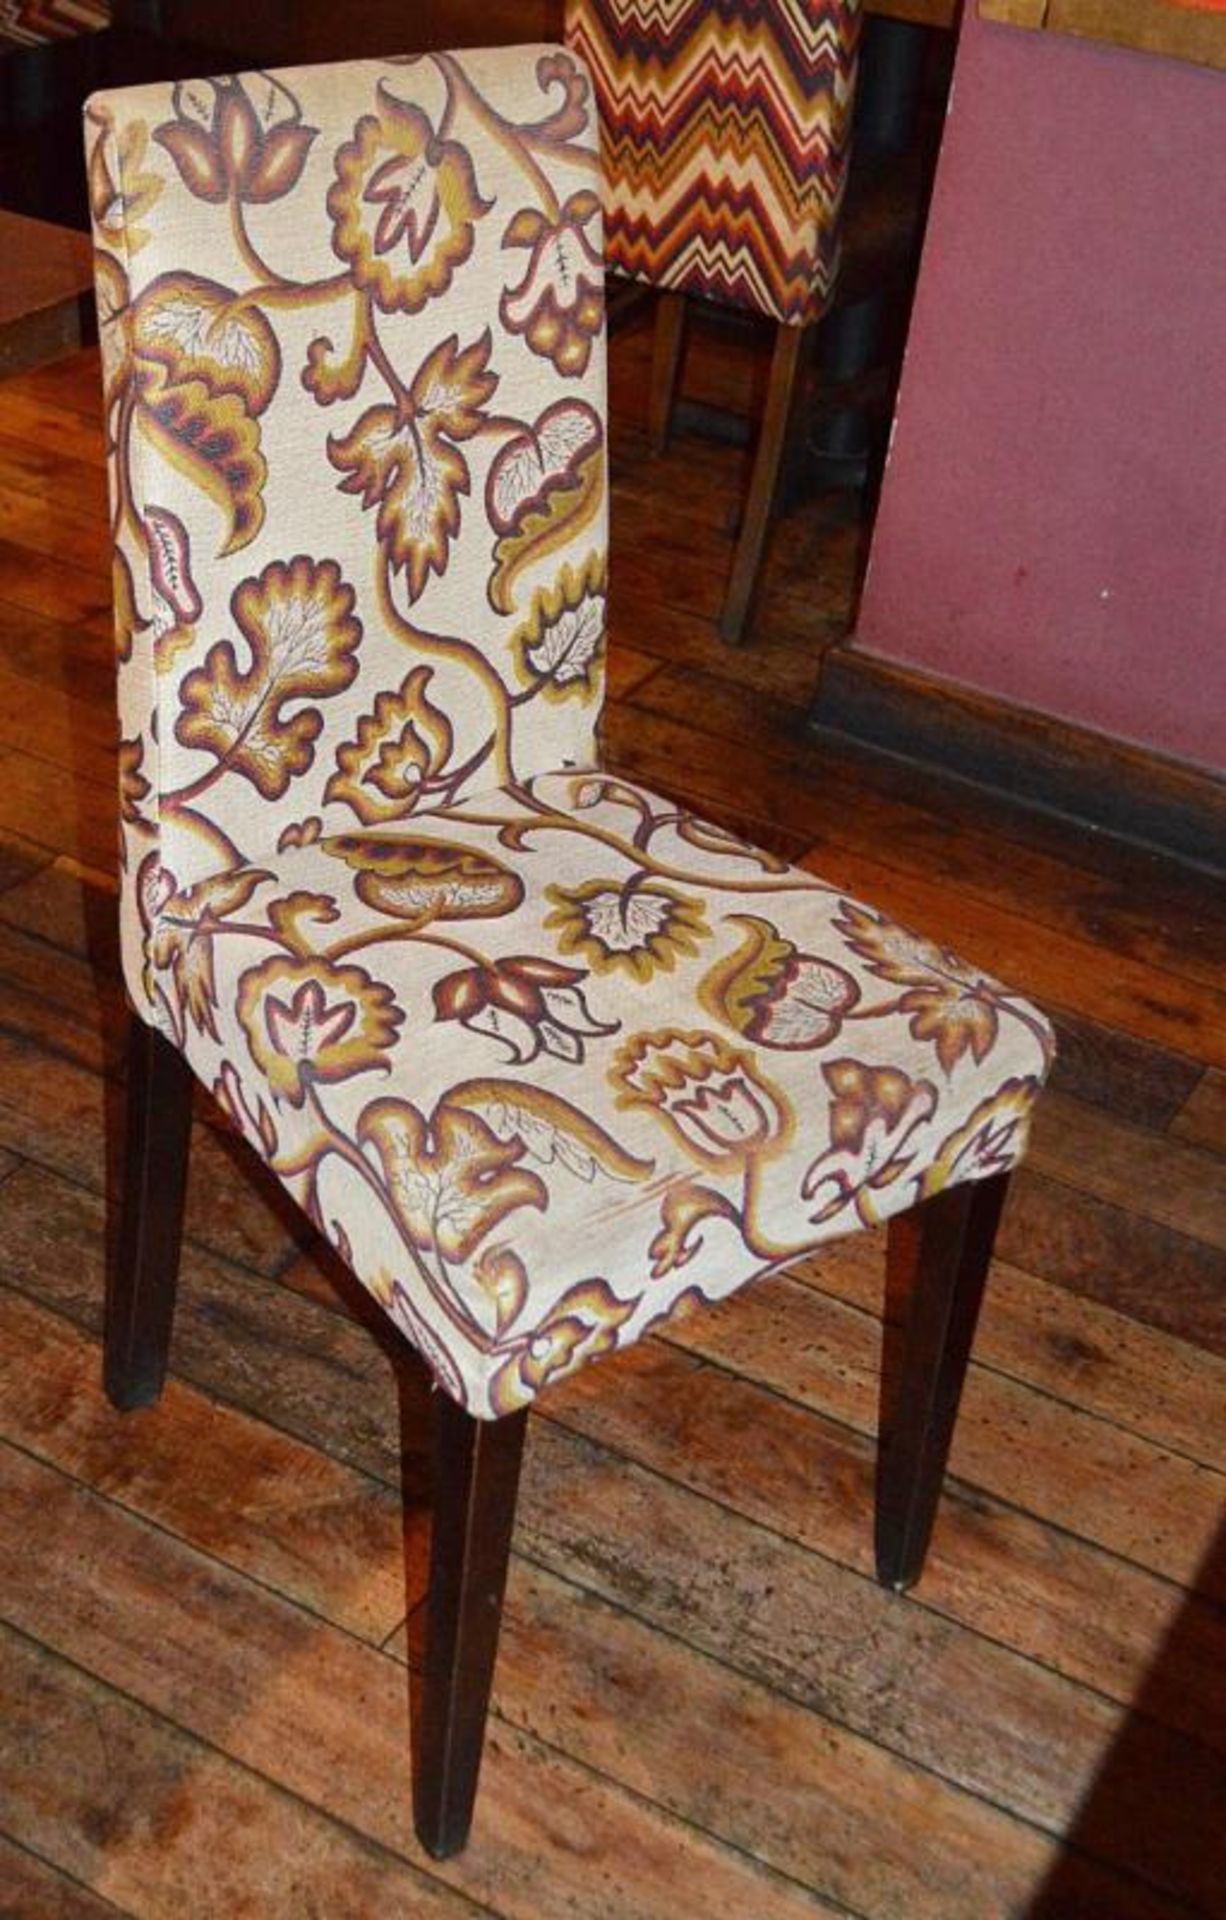 3 x Upholstered Restaurant Dining Chairs In A Floral Mexican-style Fabric